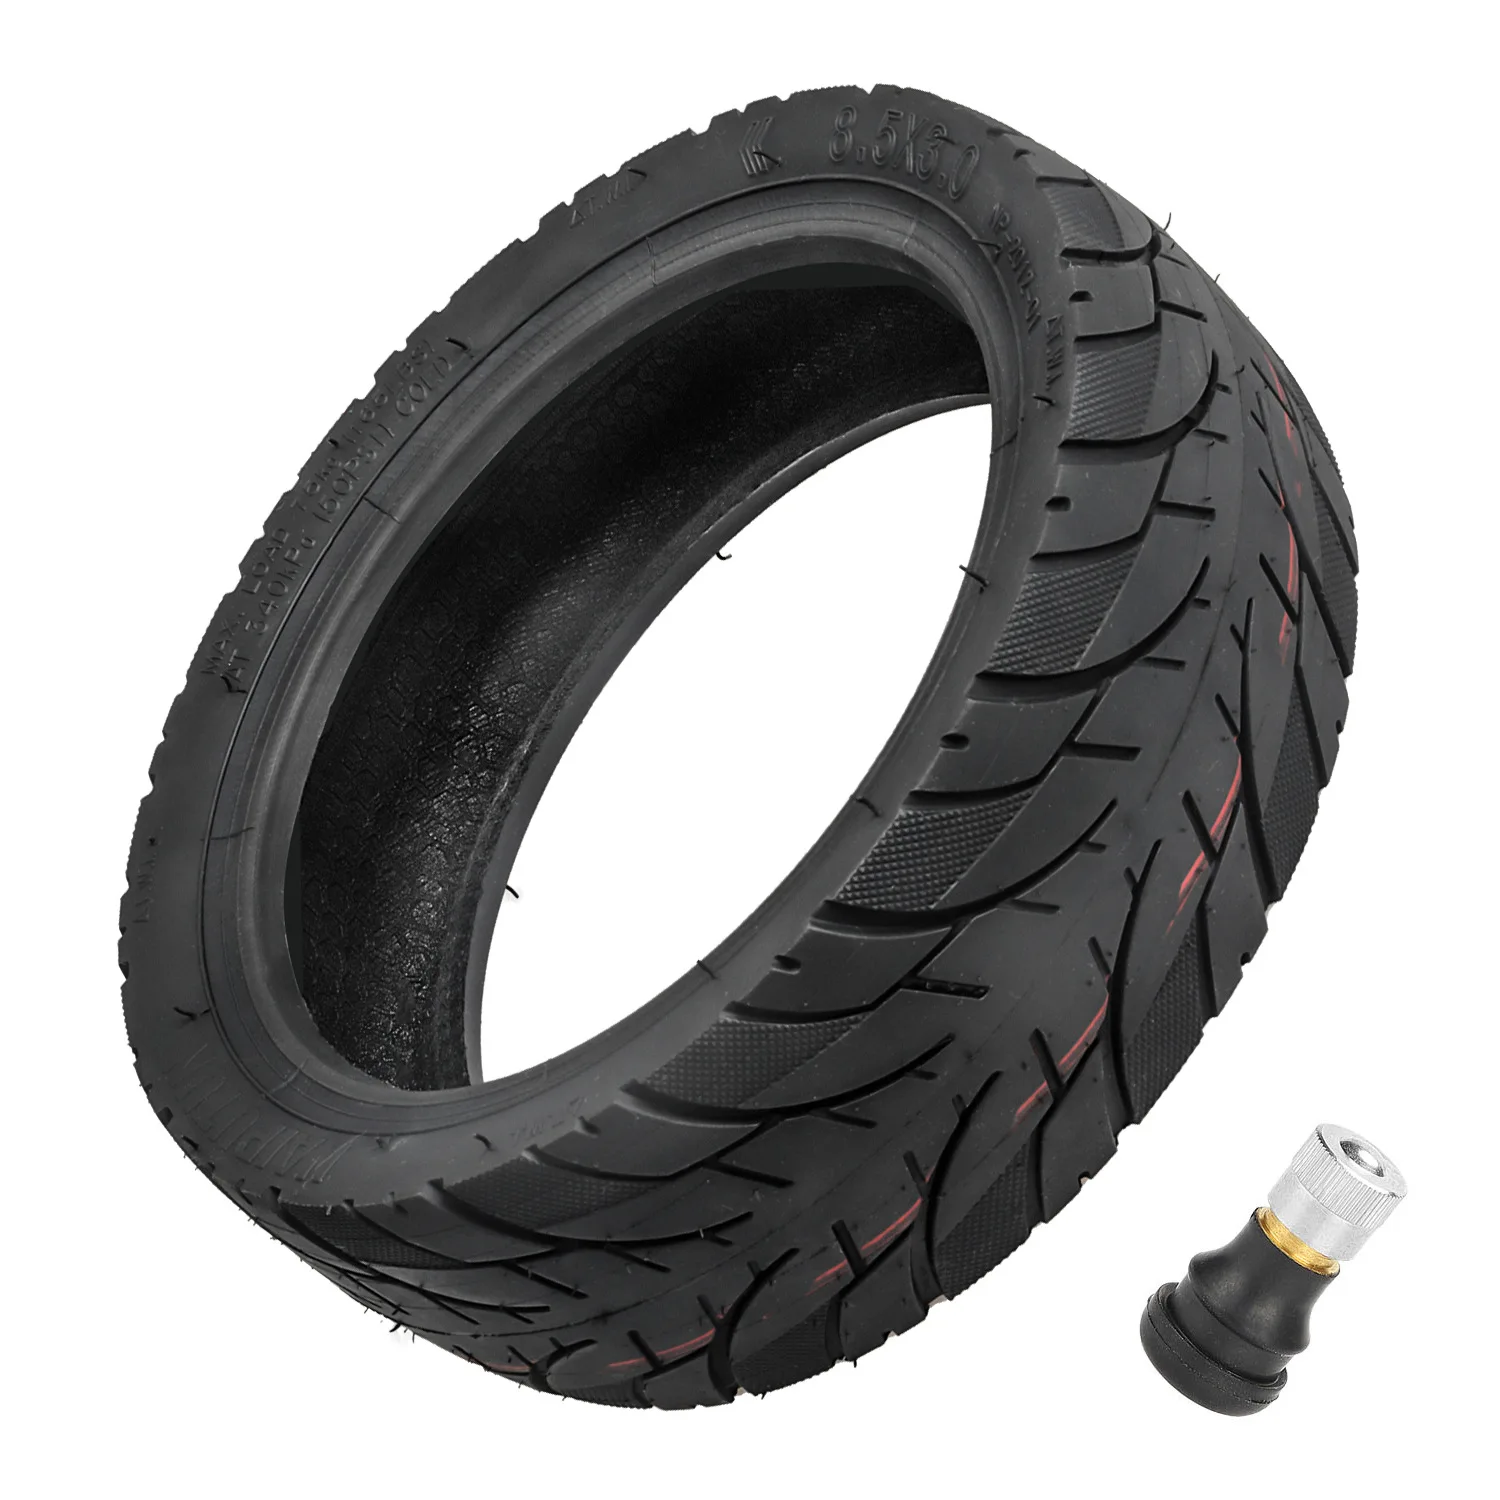 Tubeless Vacuum Tire for Xiaomi M365 Pro 1S MI3 Electric Scooter Durable Strong Tyre with Gas Nozzle 8 1/2x3.0 8.5inch